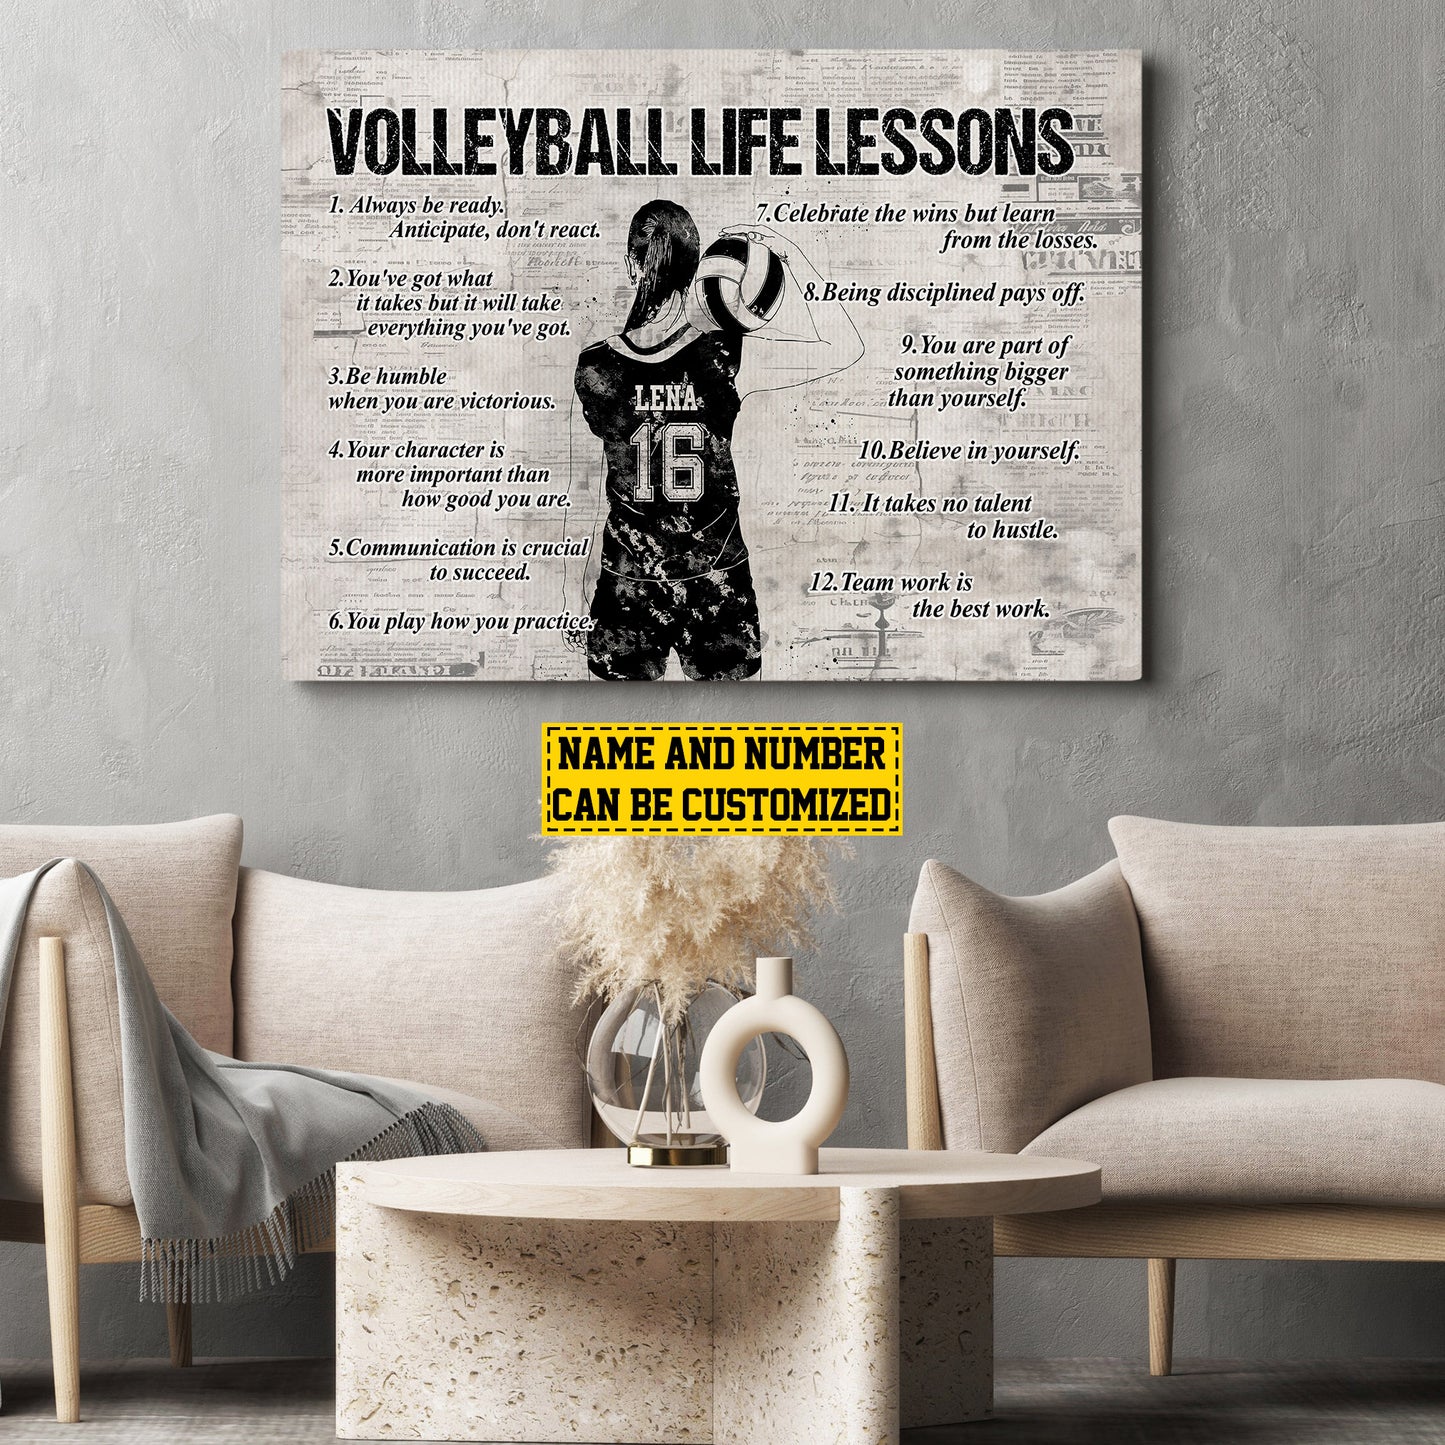 Volleyball Life Lessons, Personalized Motivational Volleyball Canvas Painting, Inspirational Quotes Wall Art Decor, Poster Gift For Volleyball Lovers